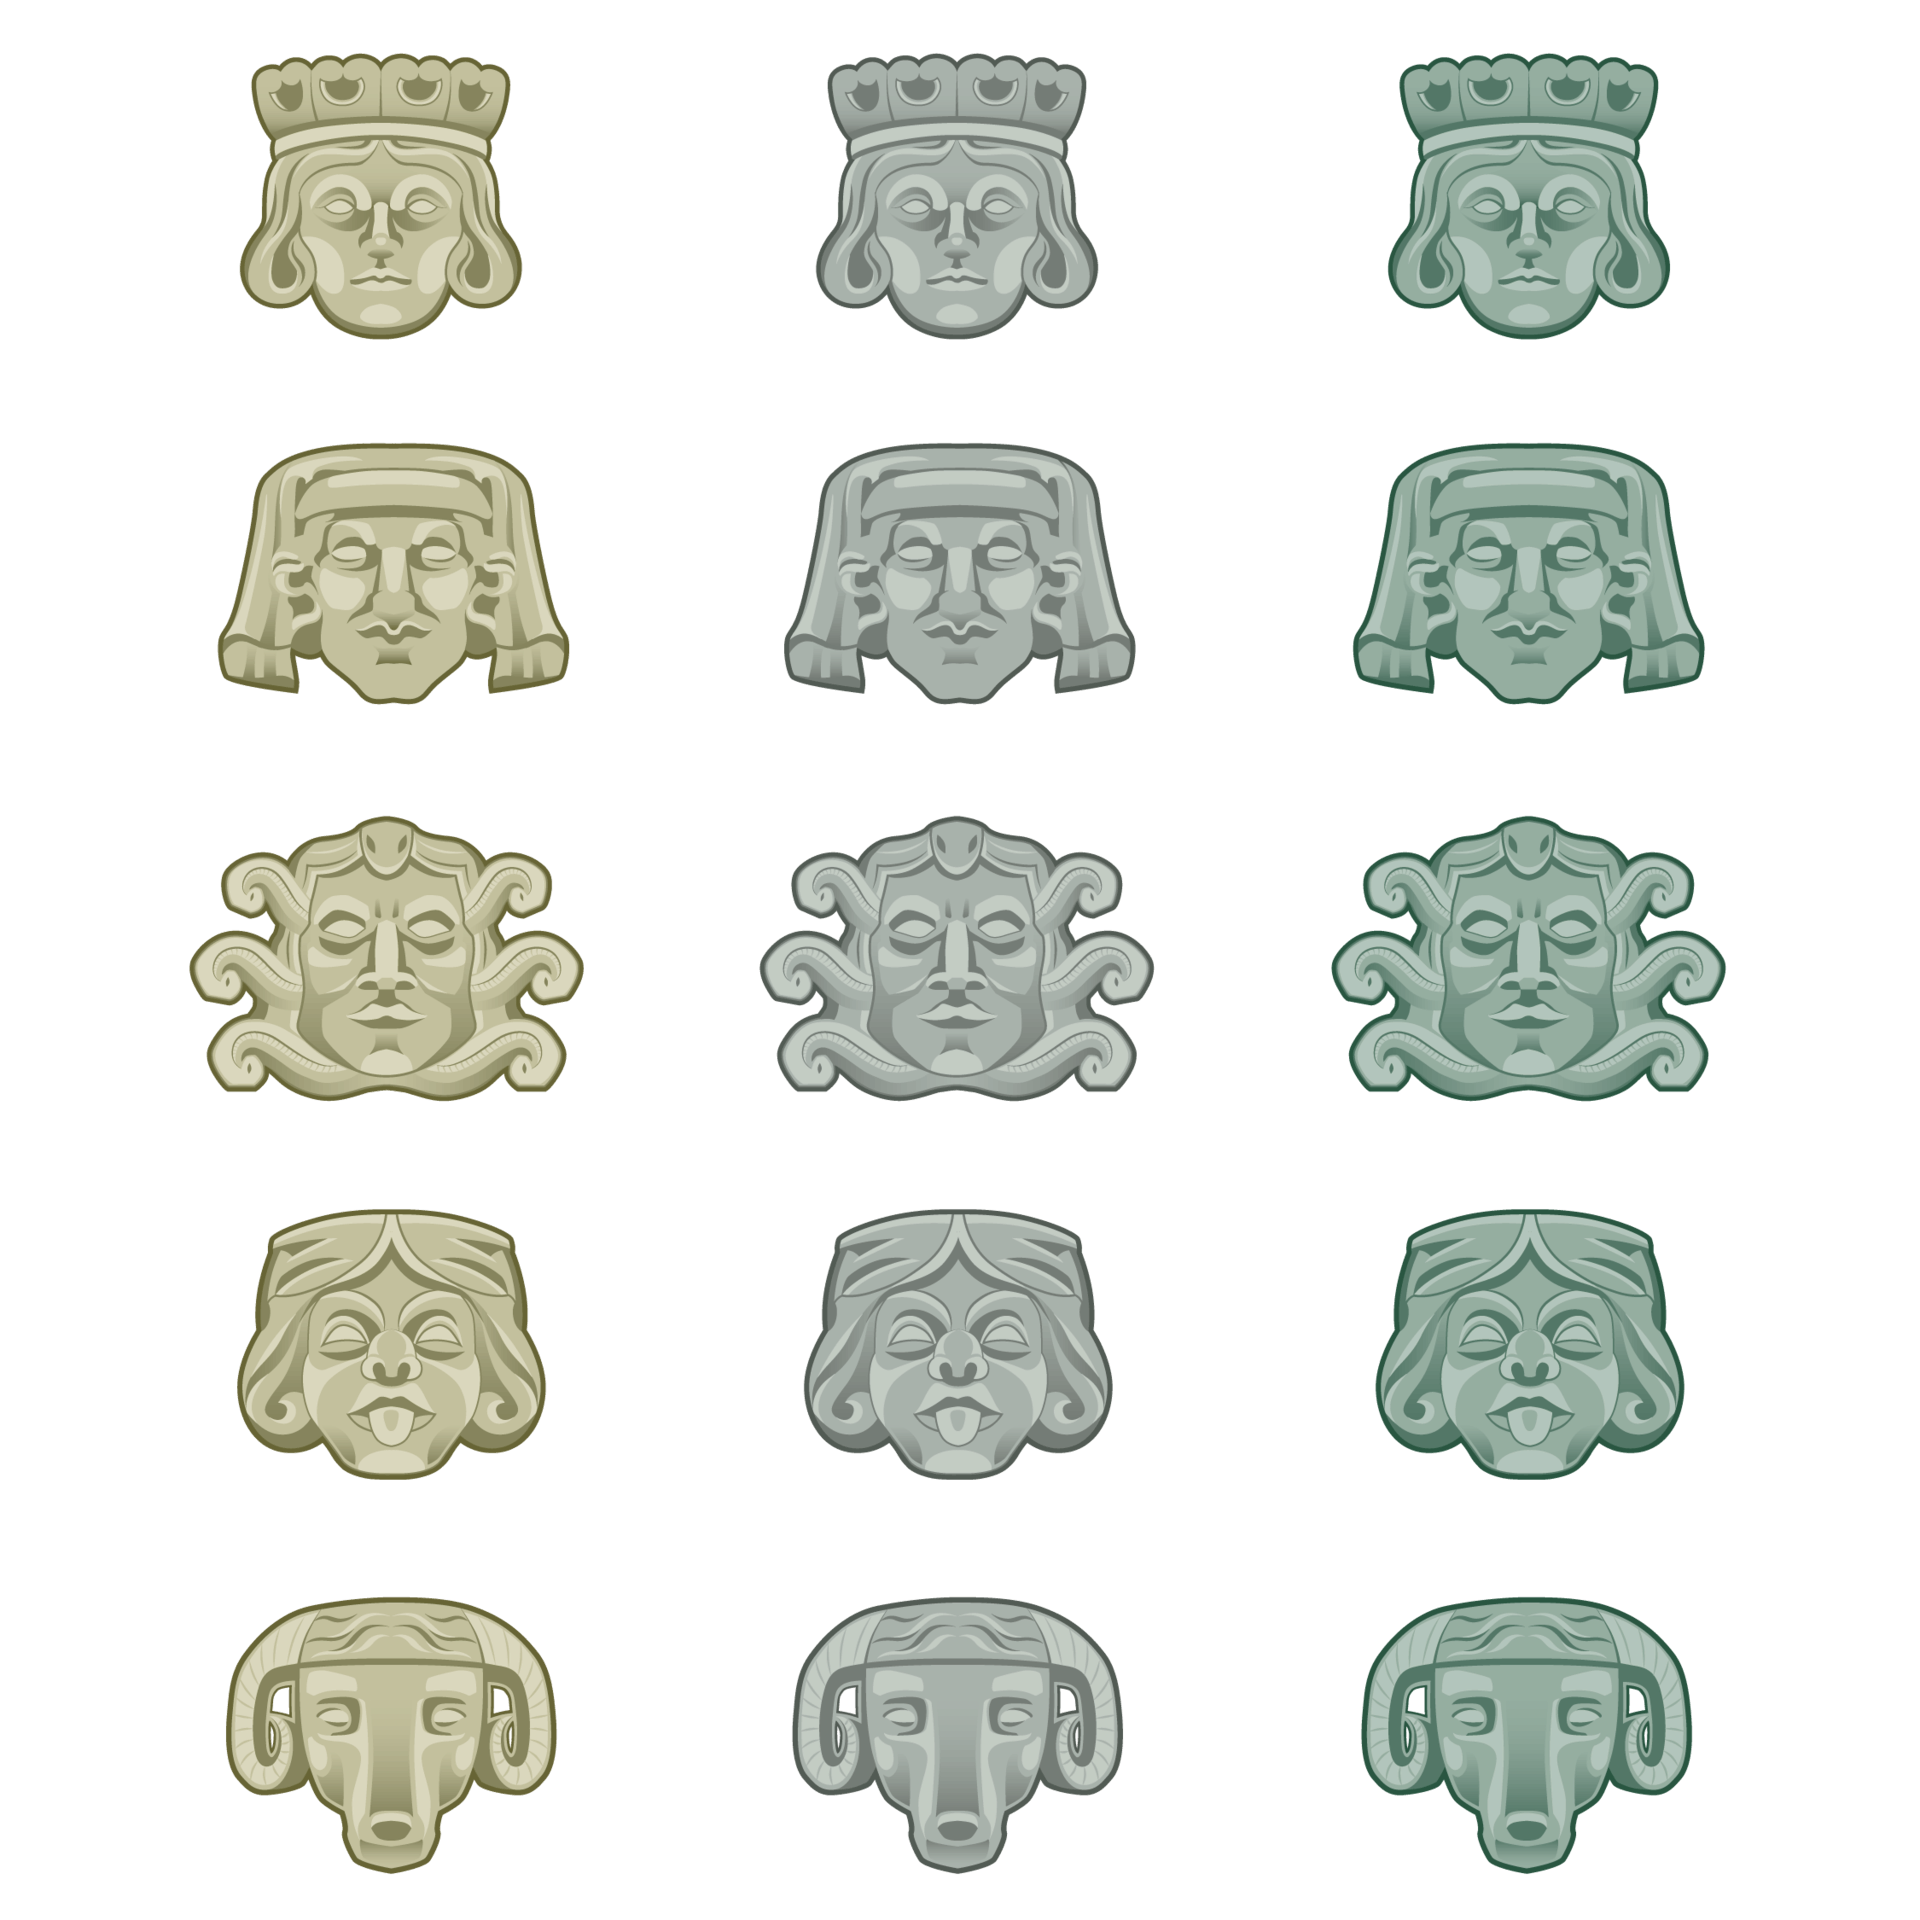 graphic designs of the grotesque faces from grove arcade